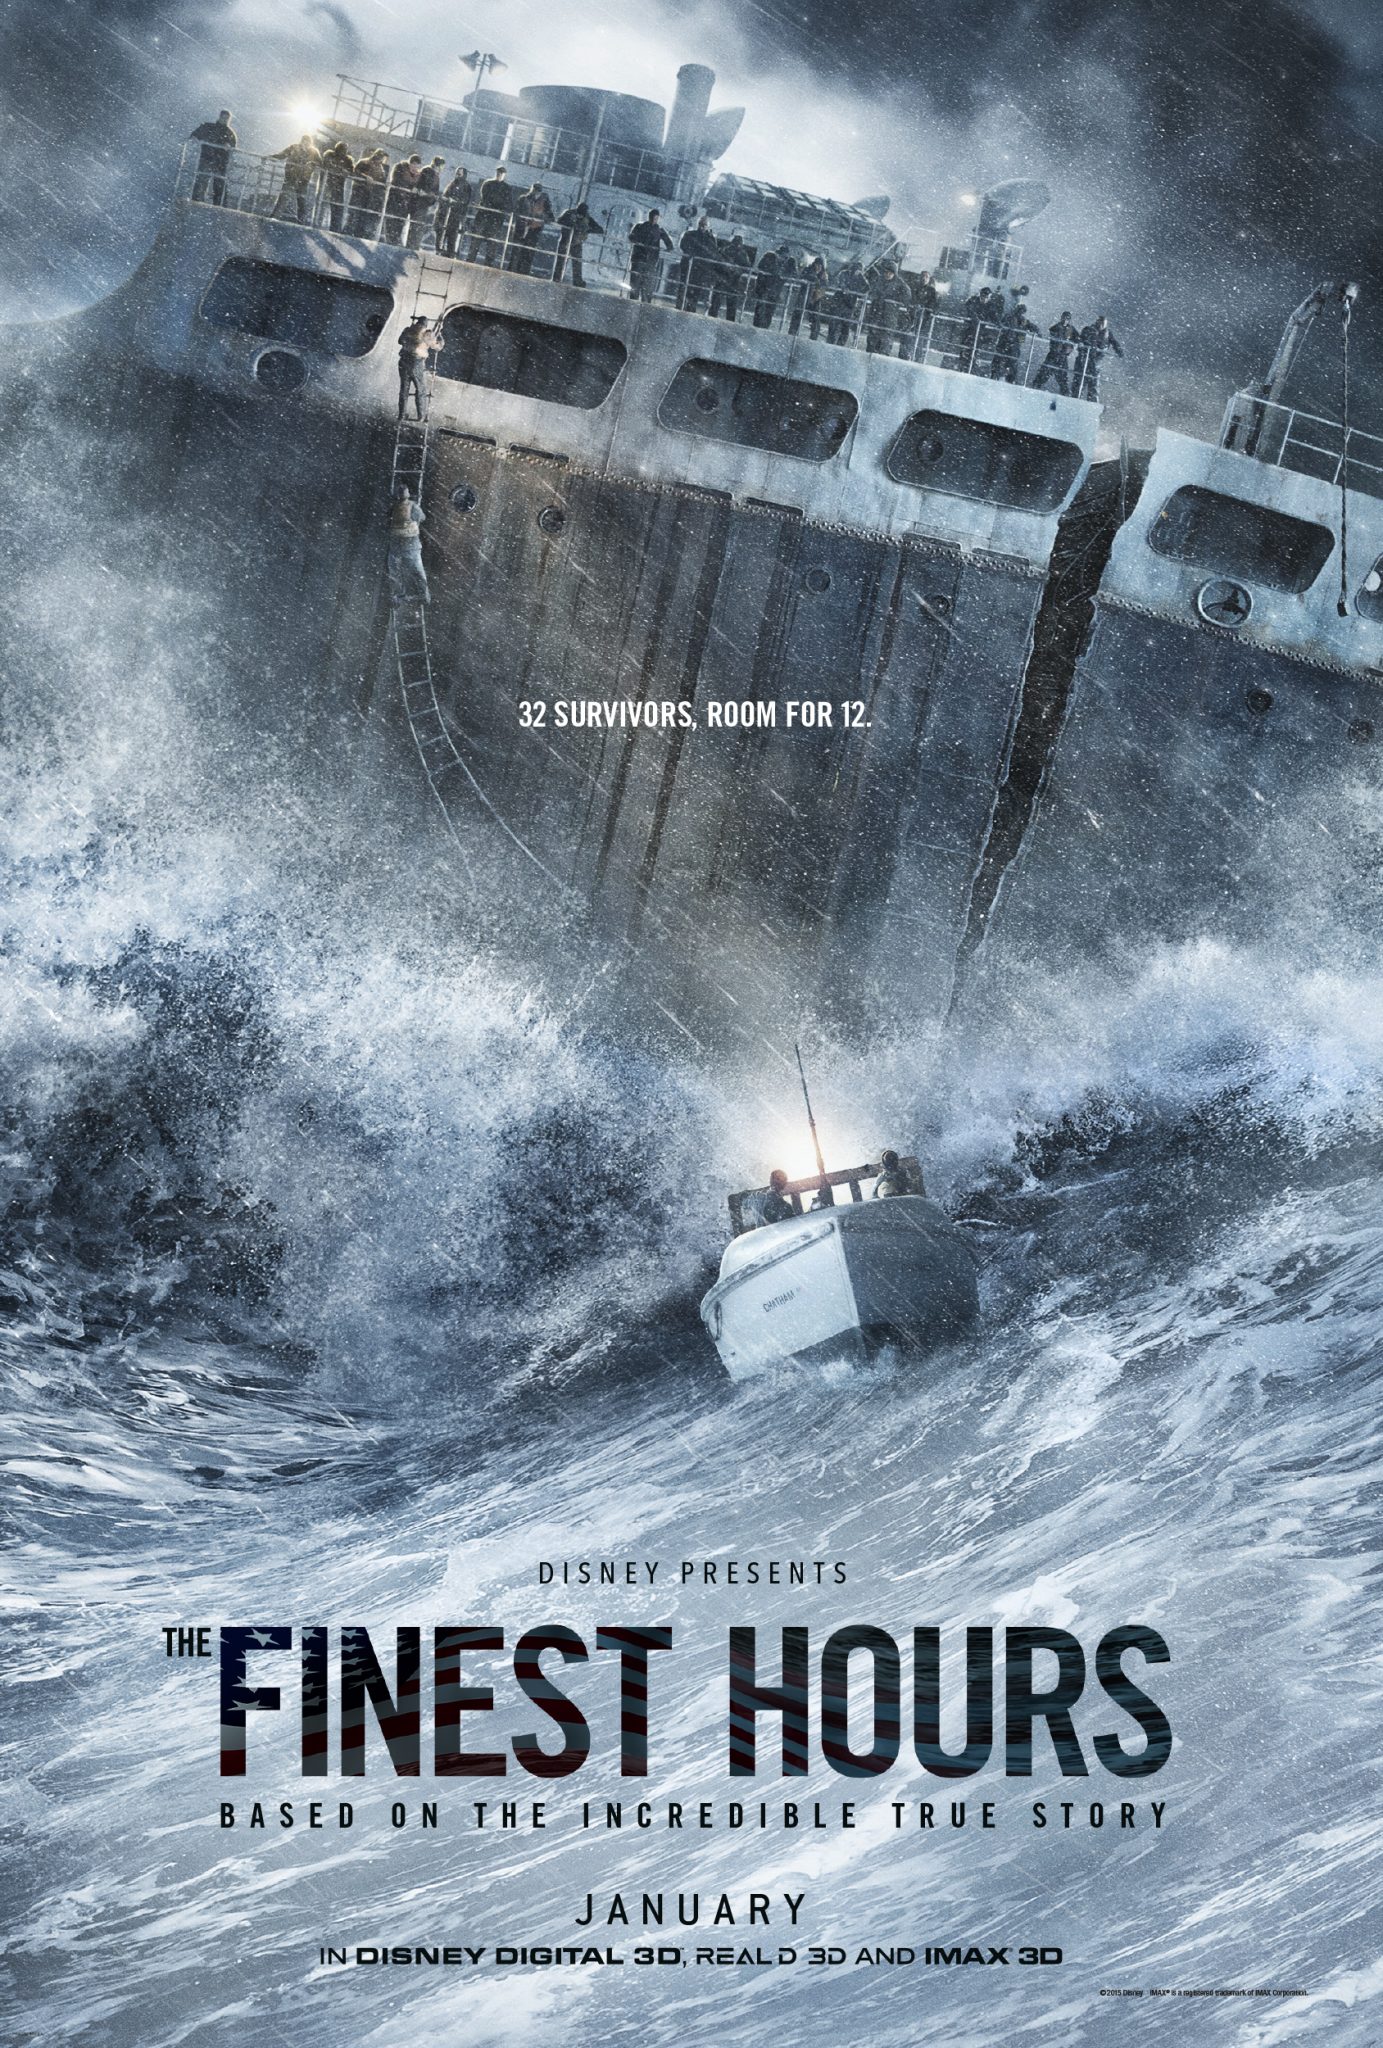 Disney’s “The Finest Hours” Movie Poster